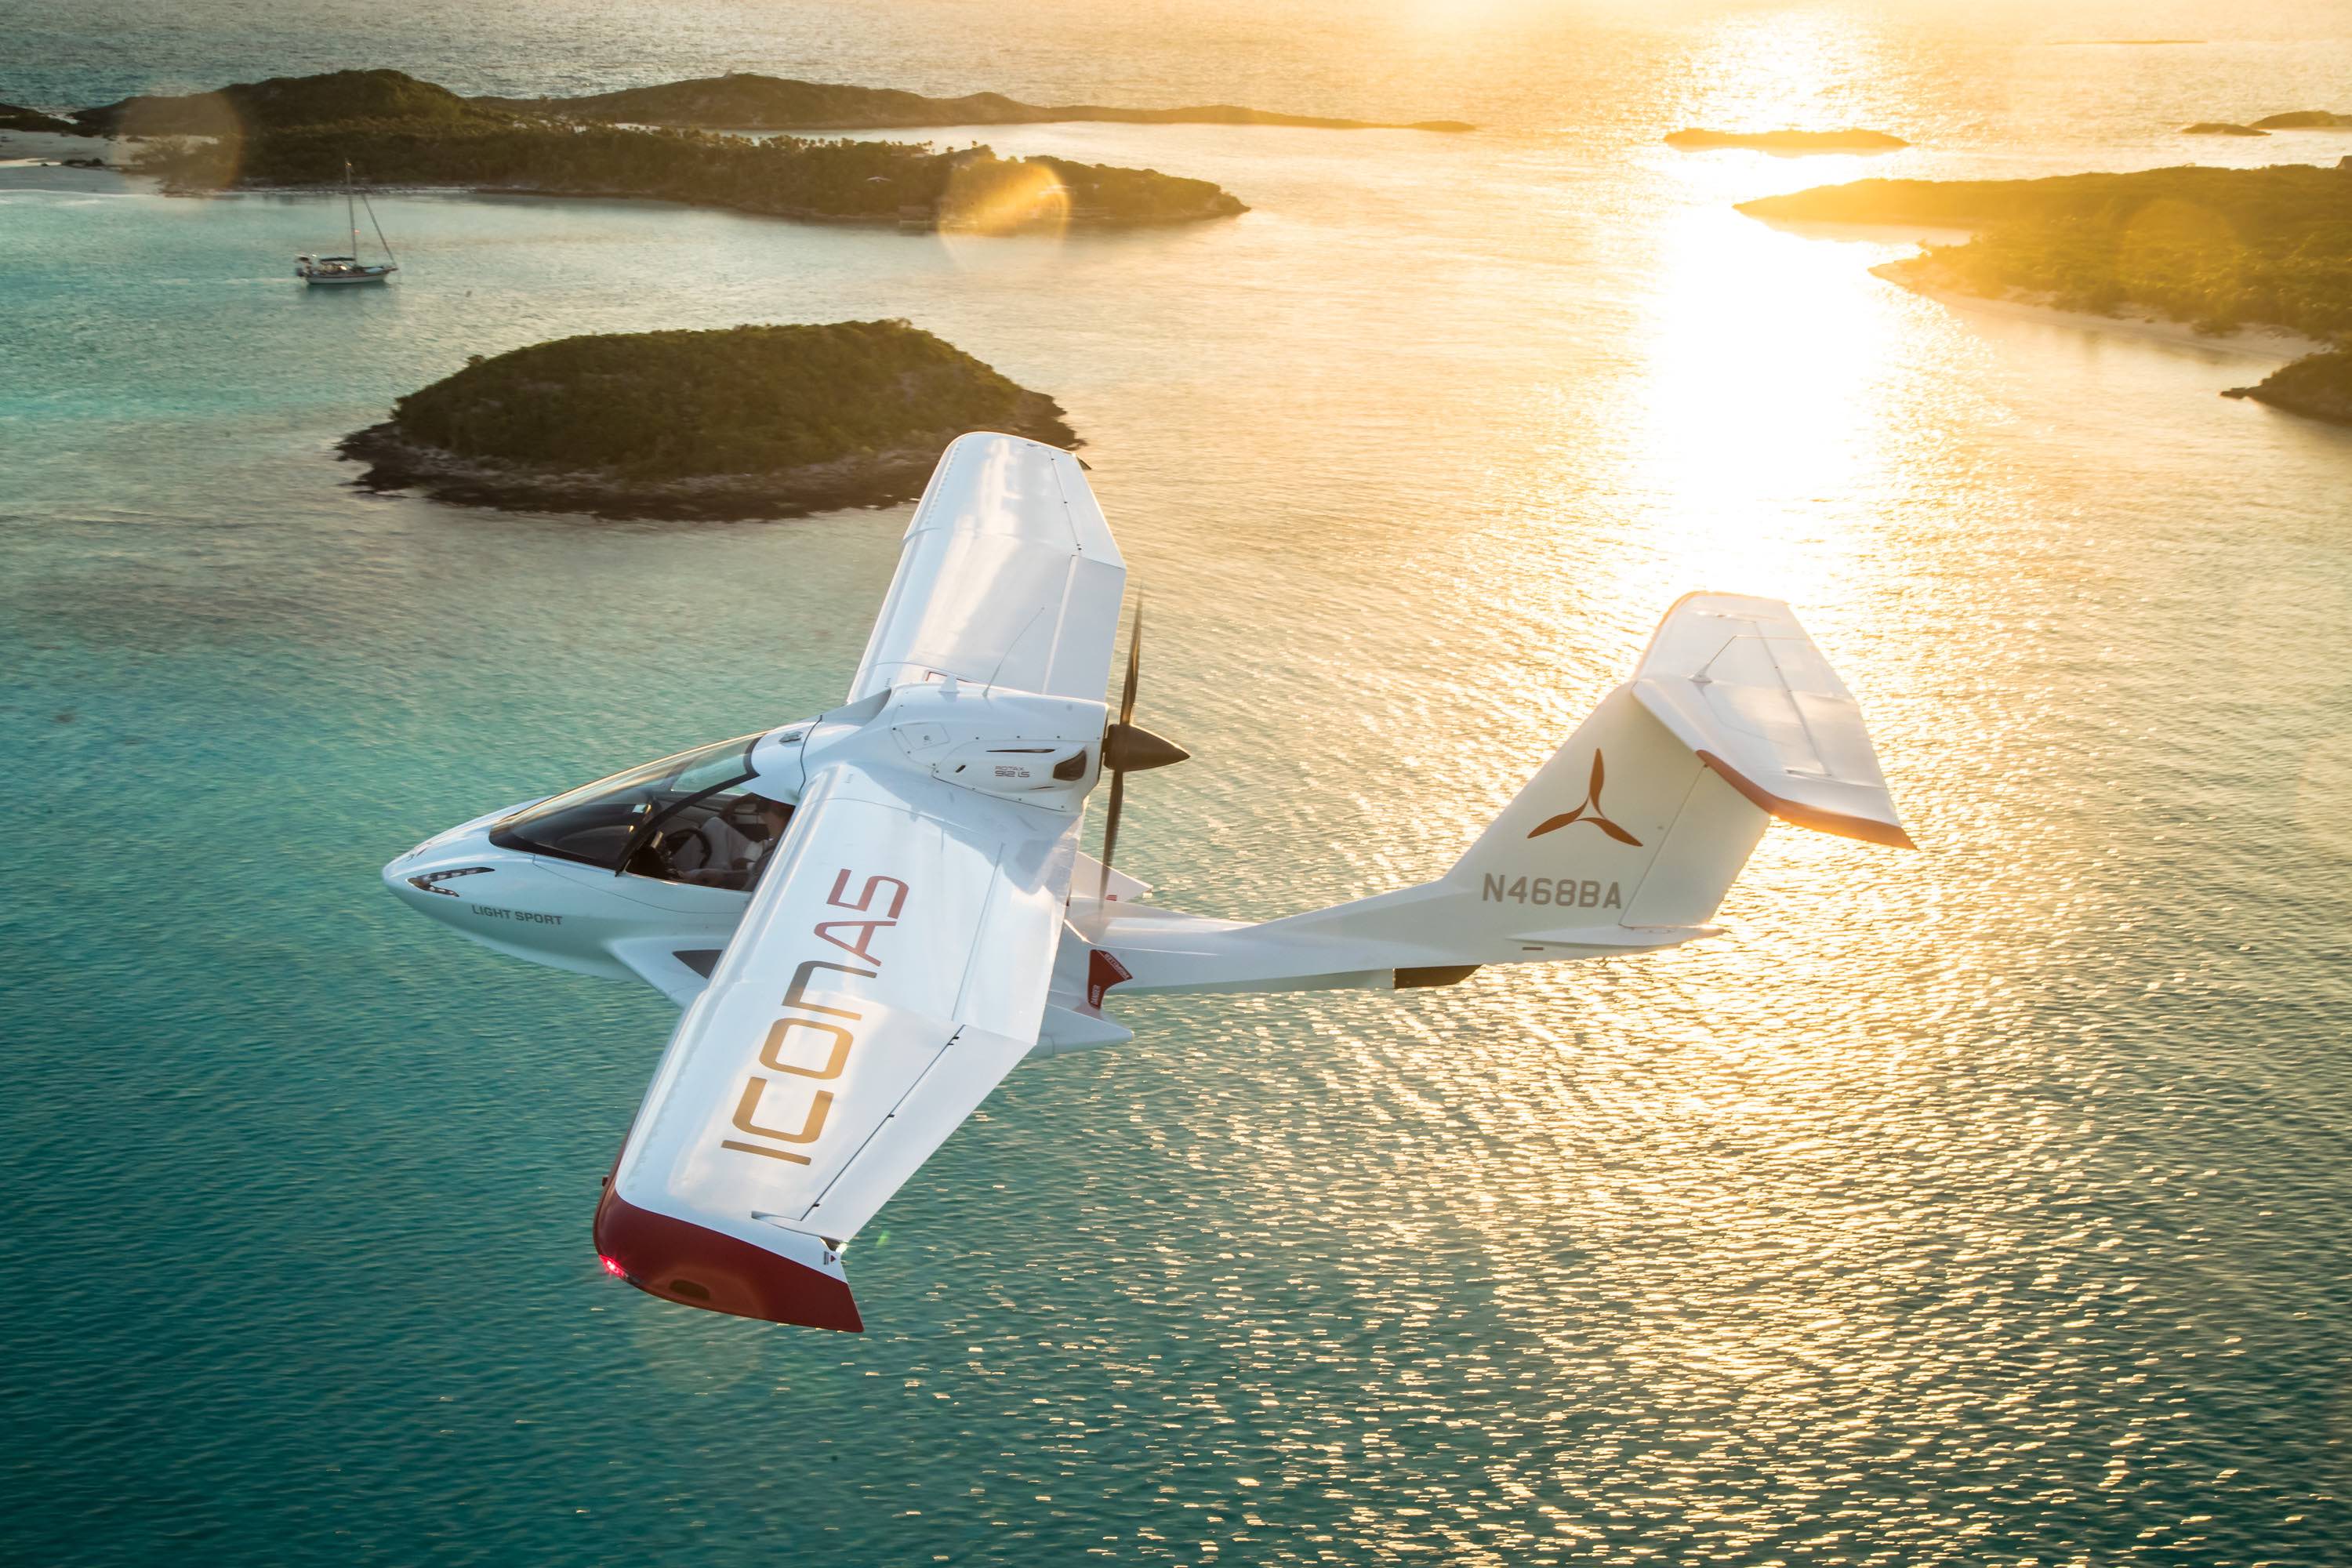 The ICON Aircraft Takes Flying To New Heights